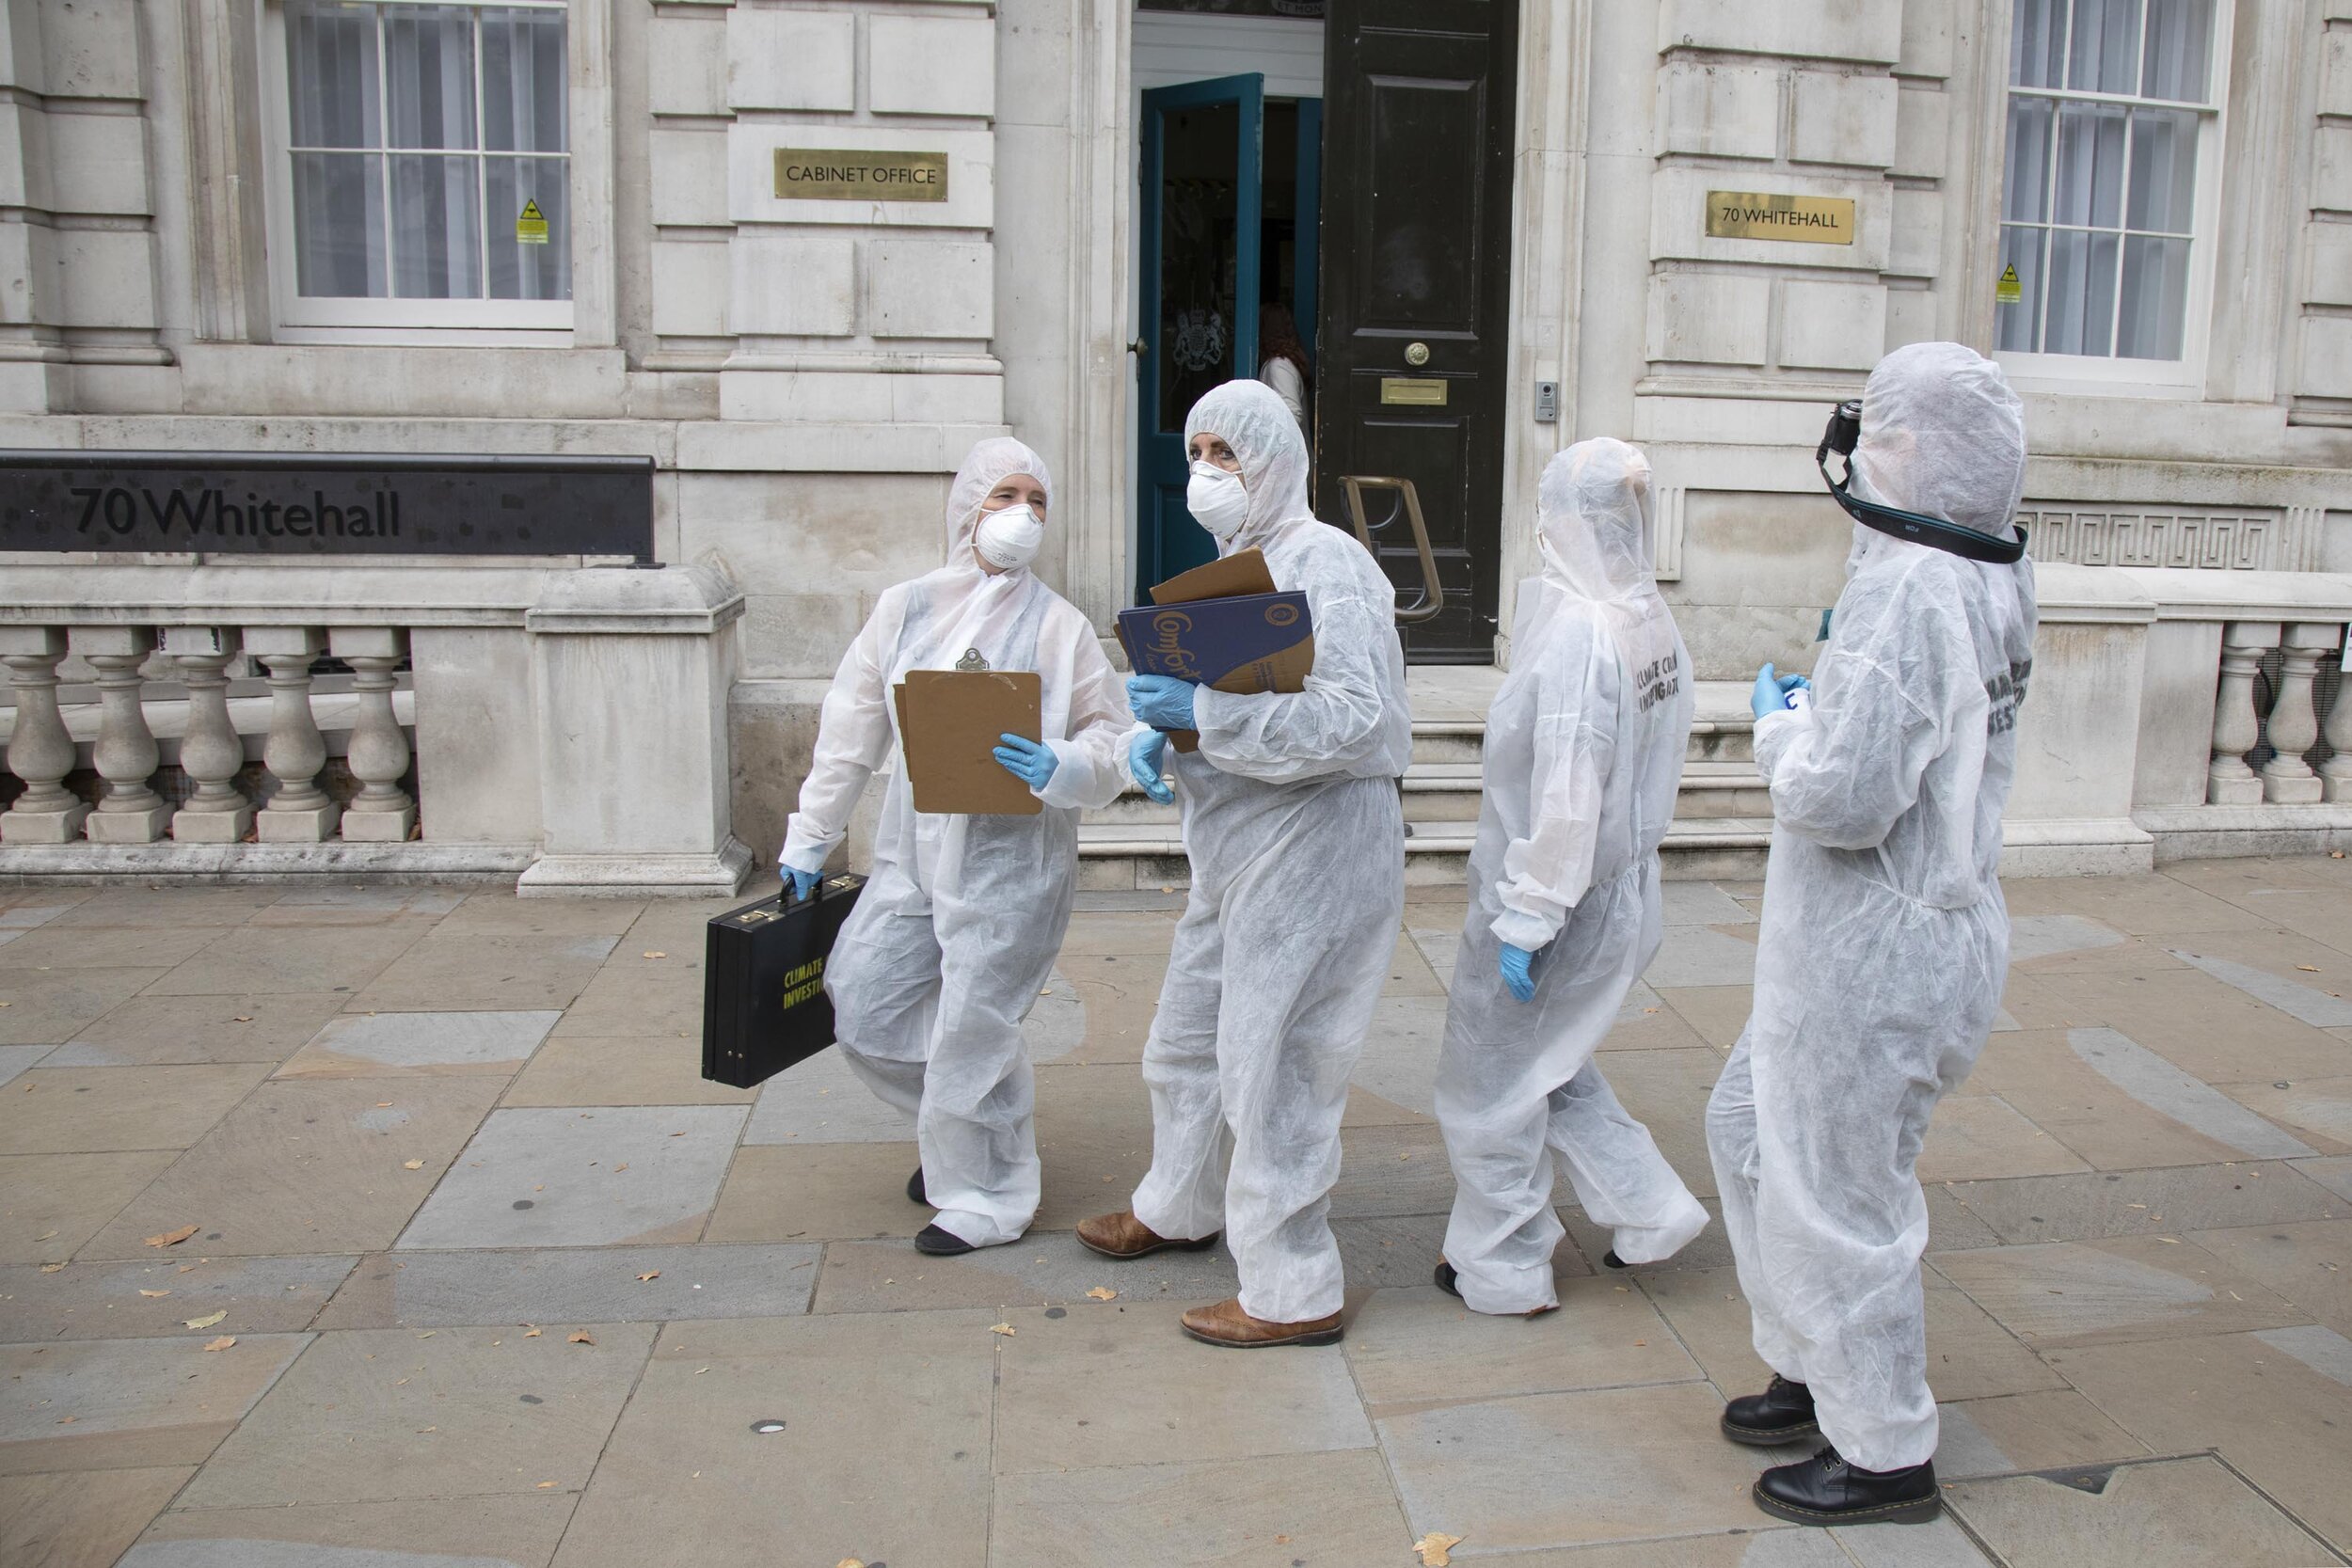  ‘Crime scene investigators’ arrive outside the Cabinet Office in a performance protesting at the UK government’s ecocide along the HS2 route. 